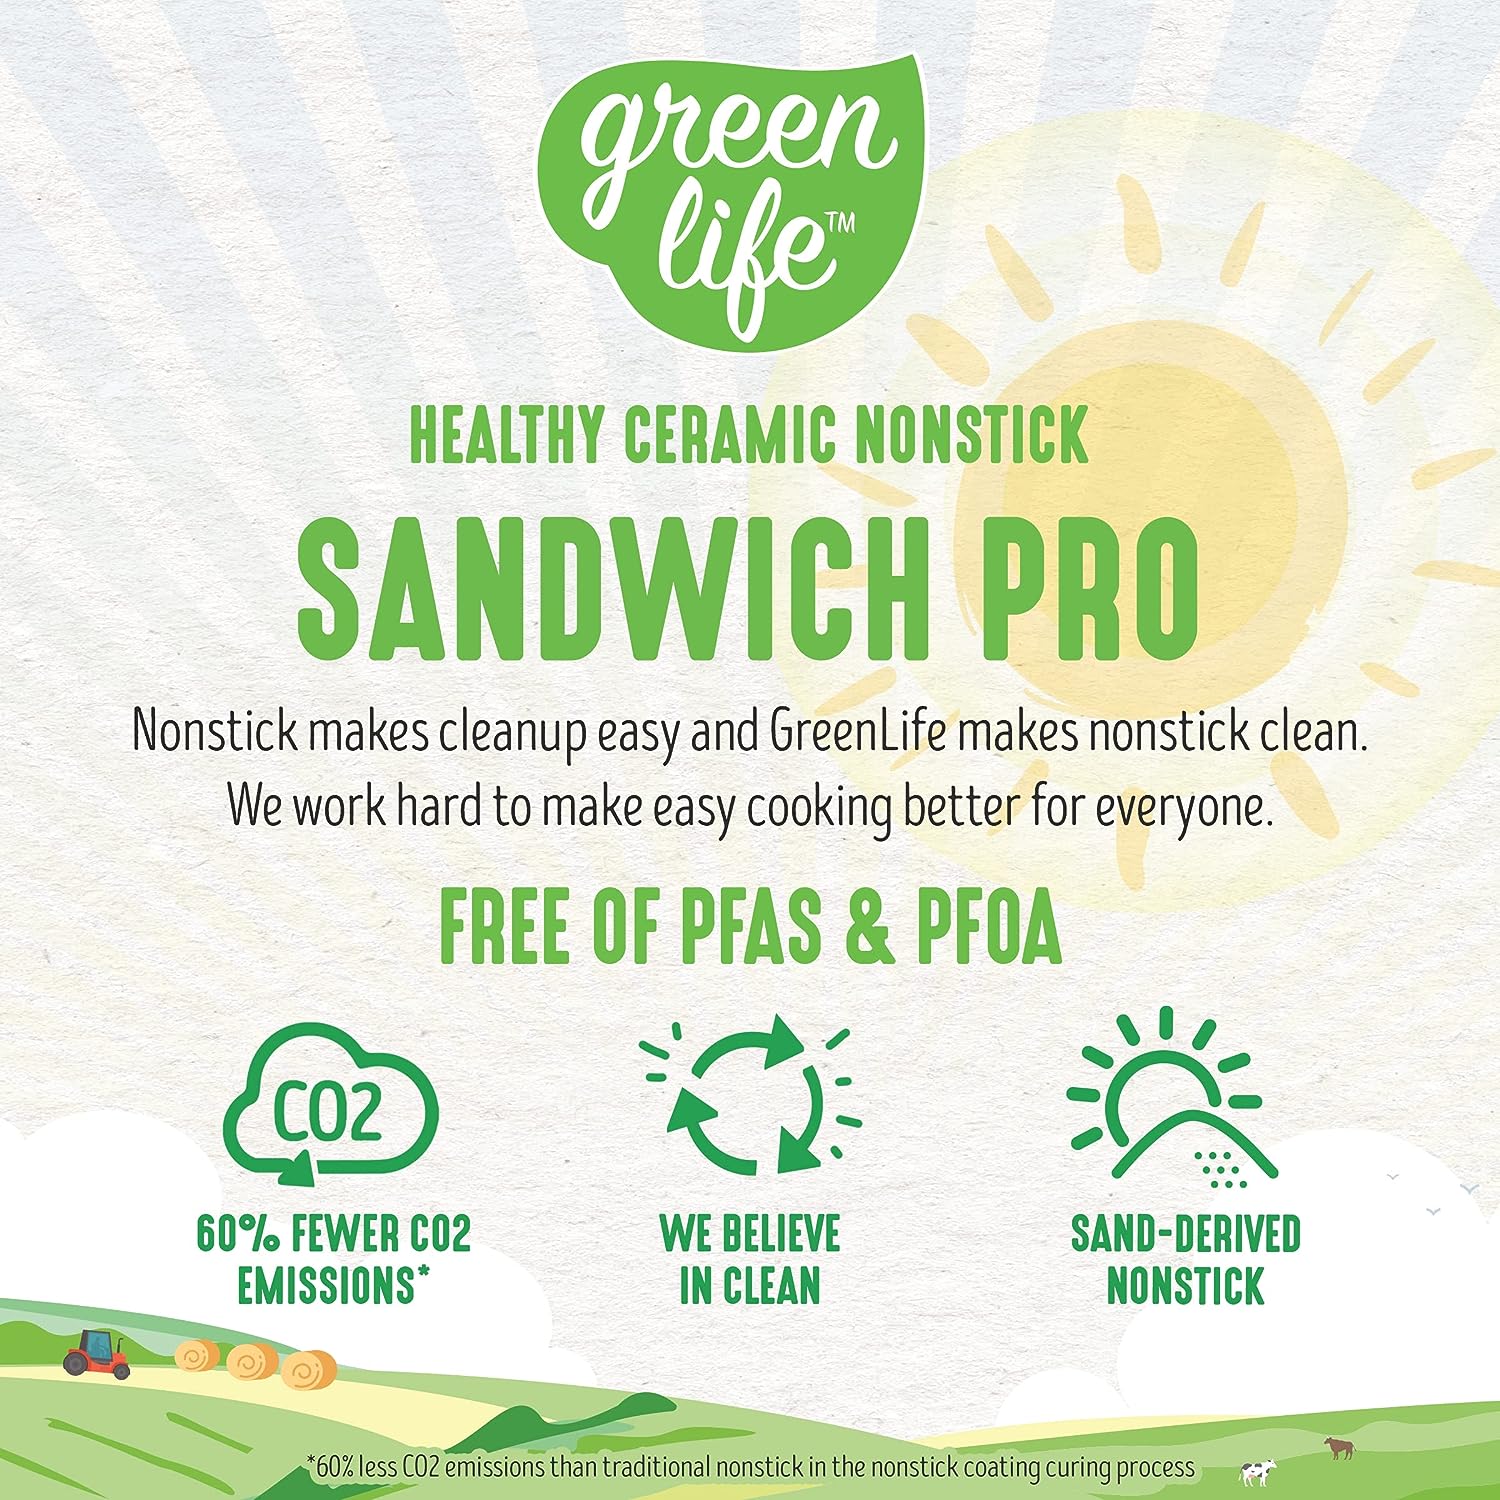 GreenLife Pro Electric Panini Press Grill and Sandwich Maker, Healthy Ceramic Nonstick Plates, Easy Indicator Light, PFAS-Free, Yellow